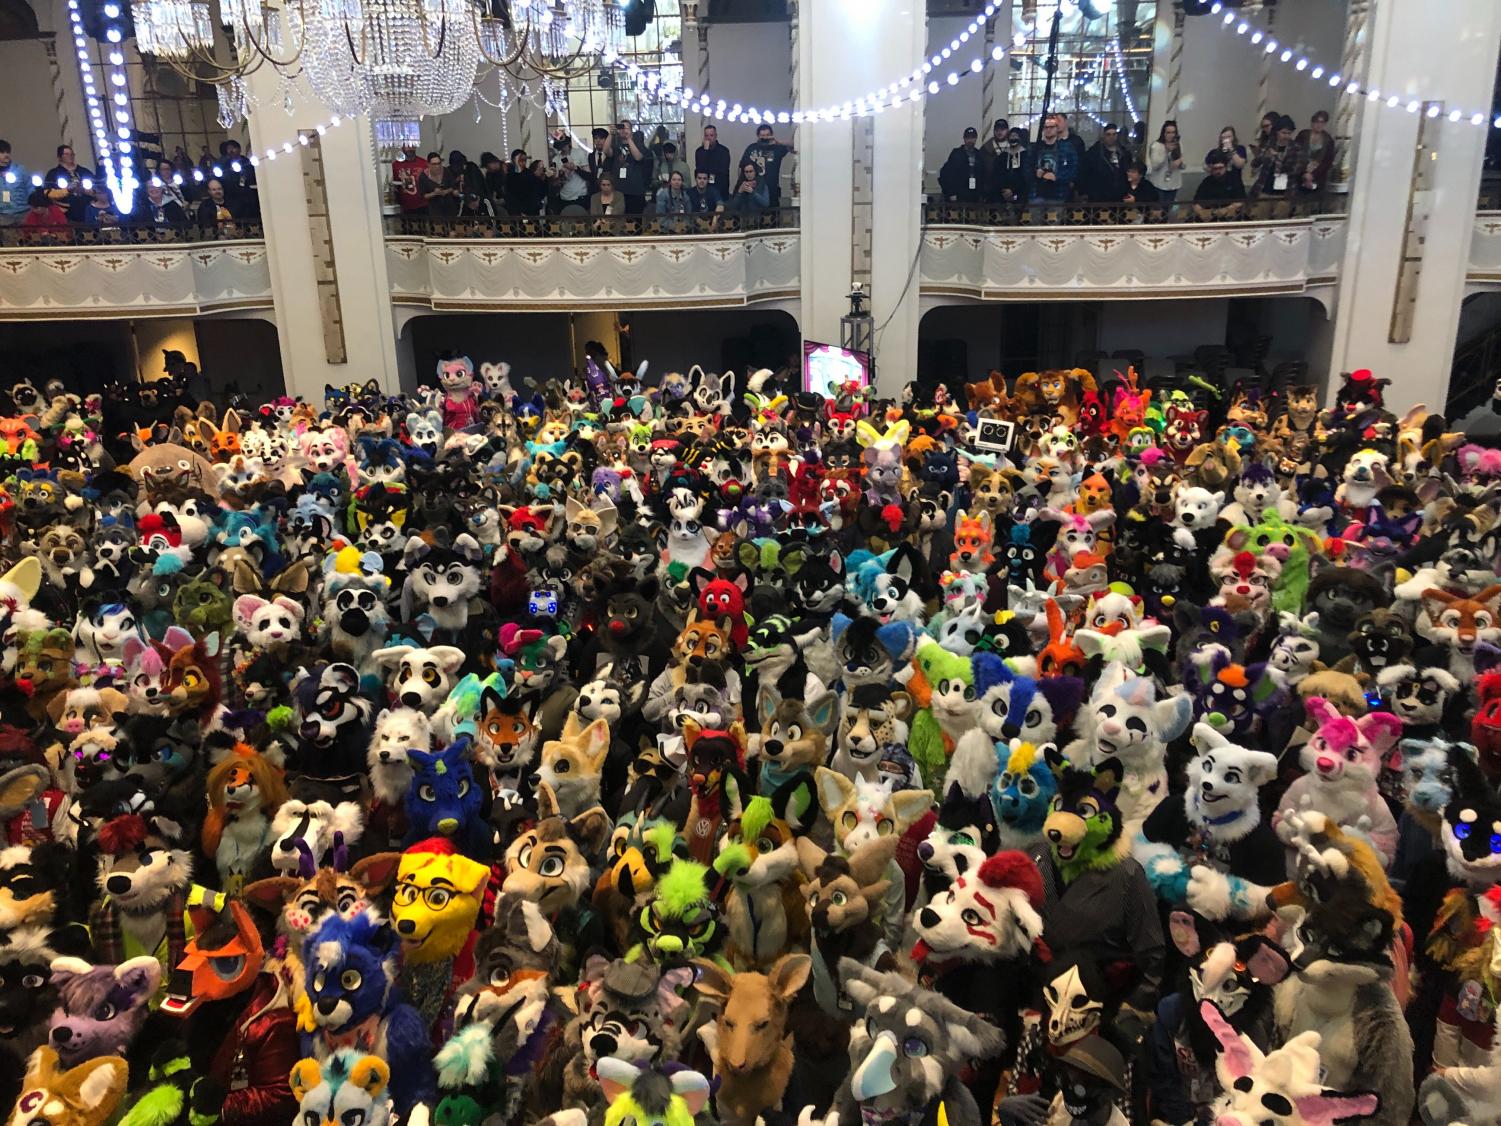 Anthro New England convention links furries to LGBTQ+ community The